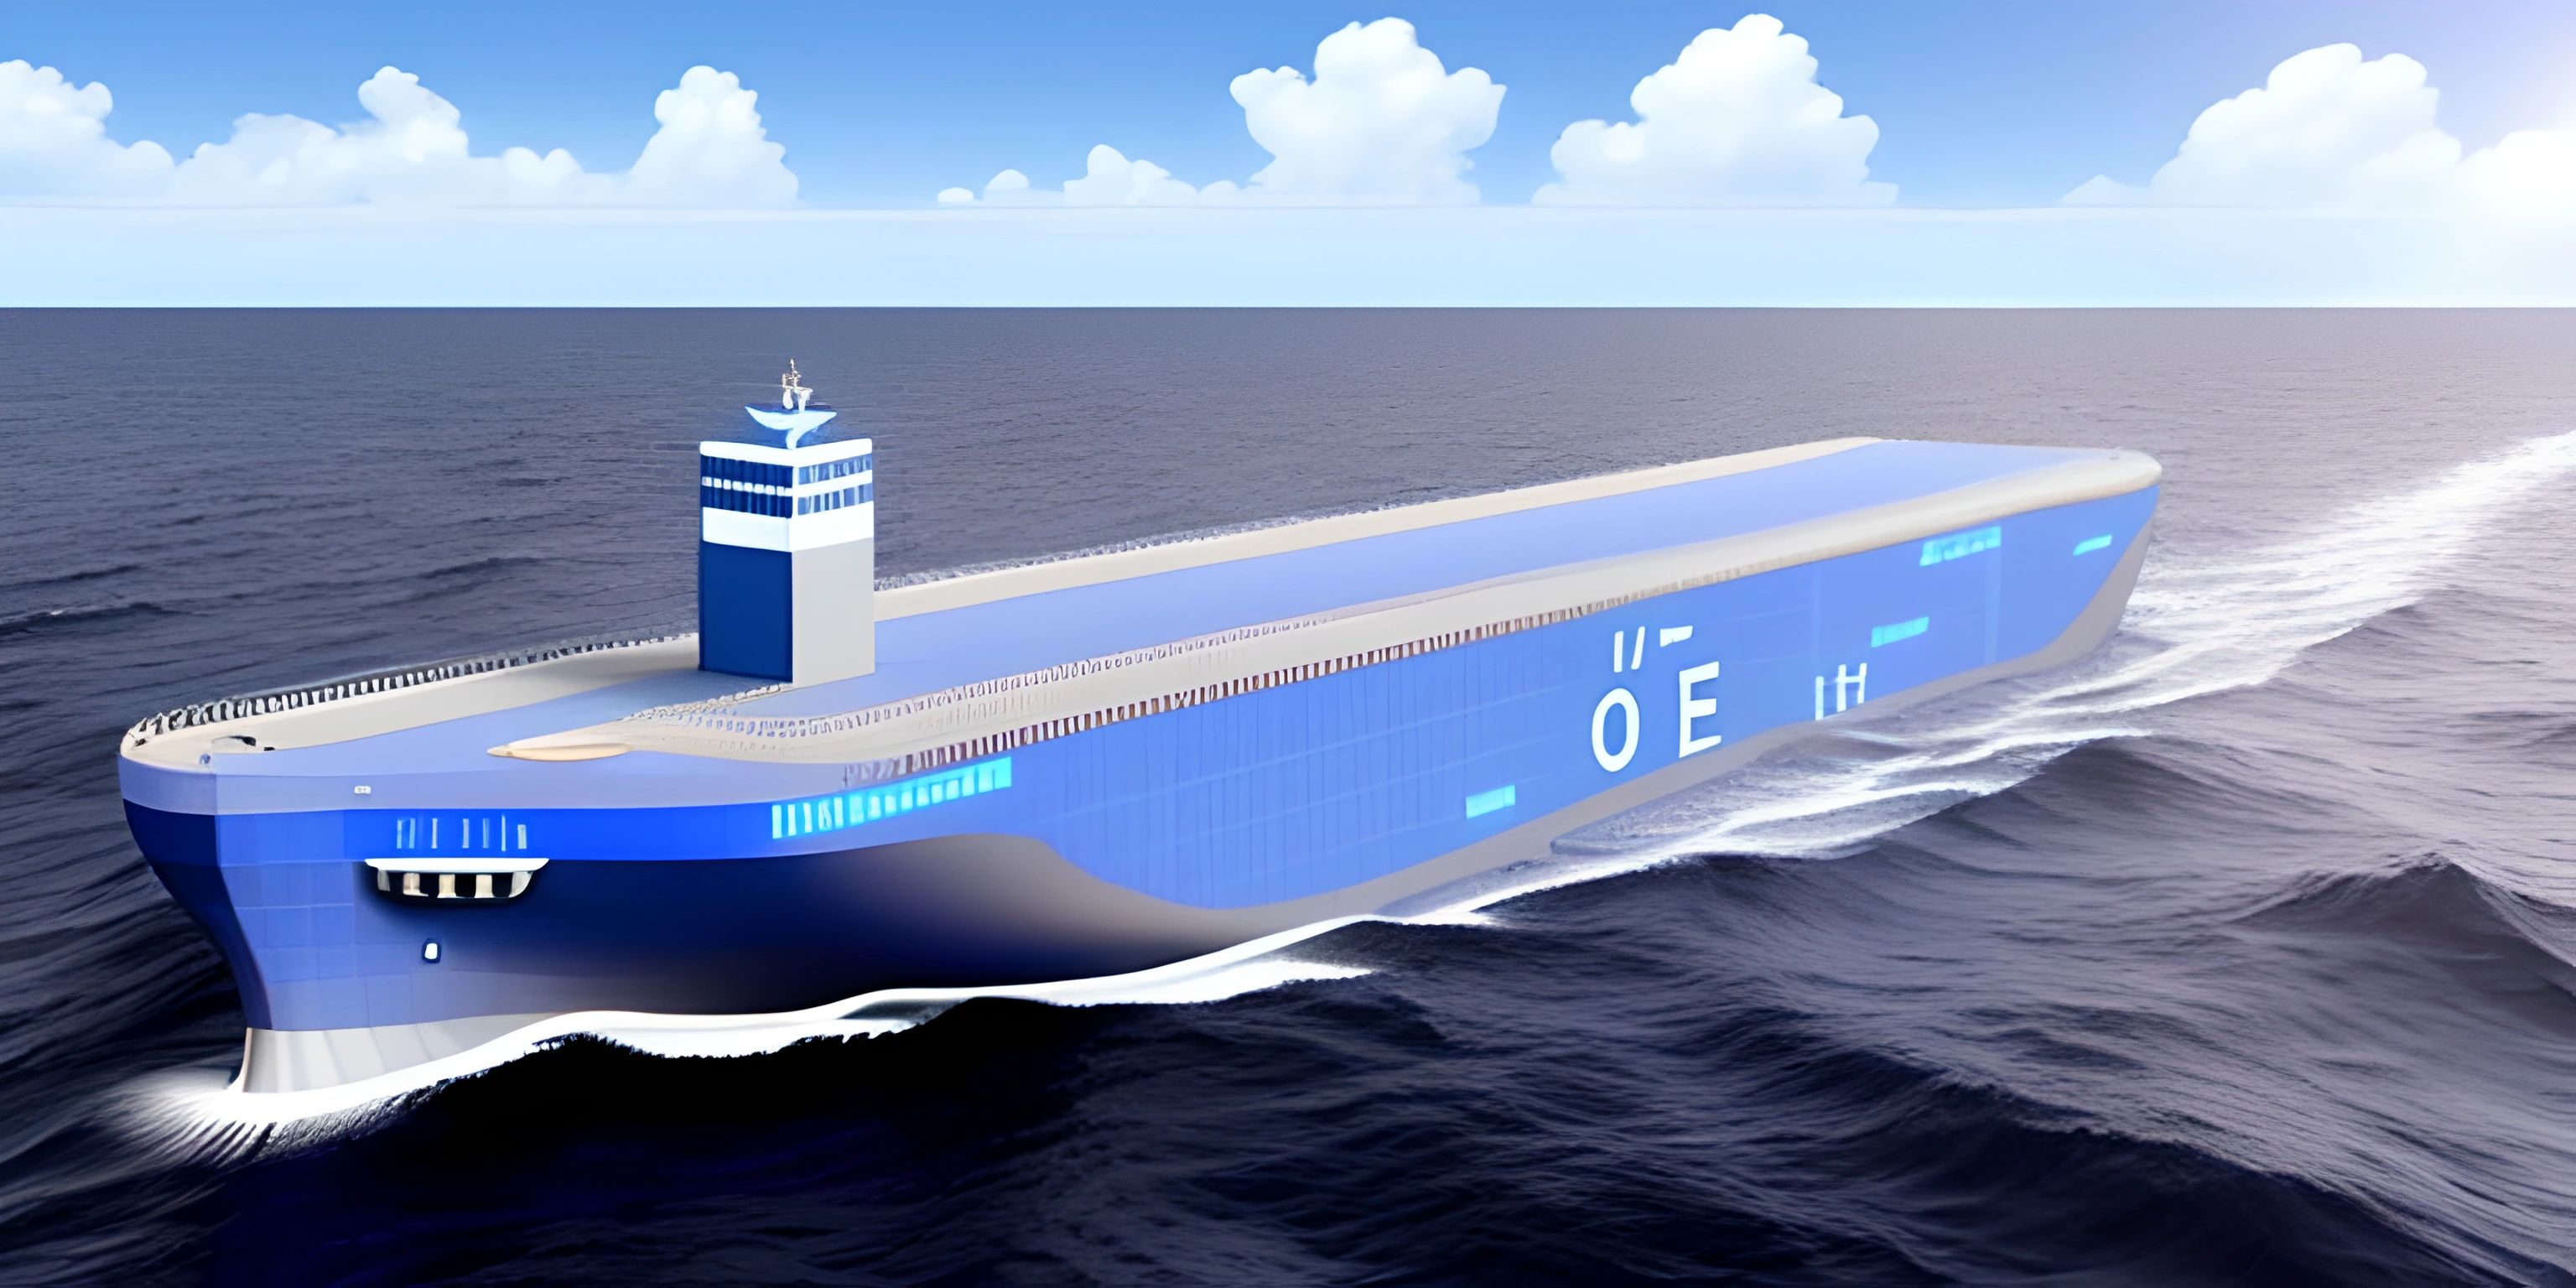 a large blue cargo ship in the middle of the ocean waves that wash its tail legs